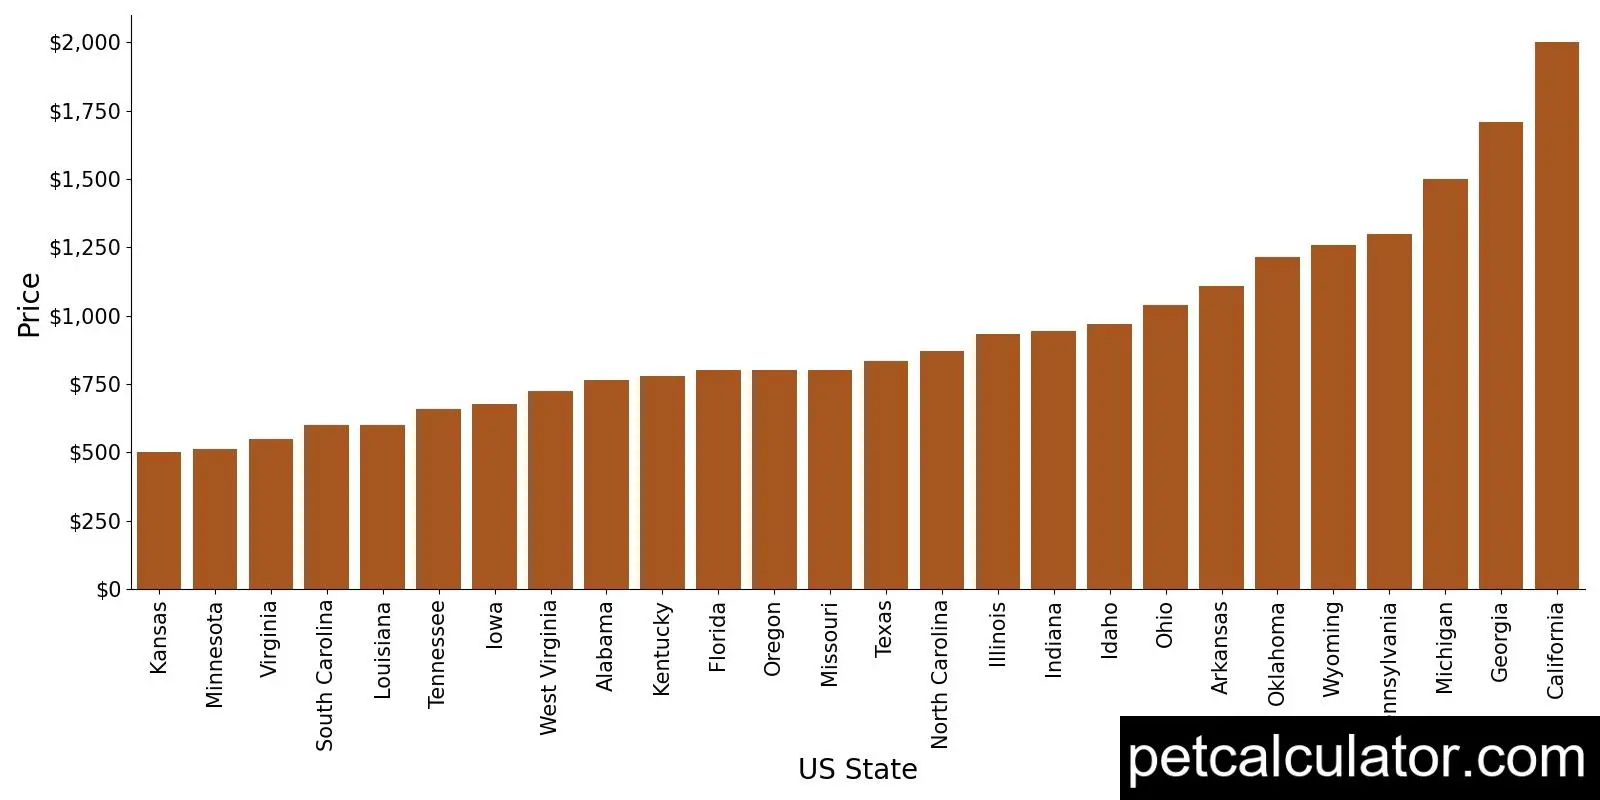 Price of Bloodhound by US State 